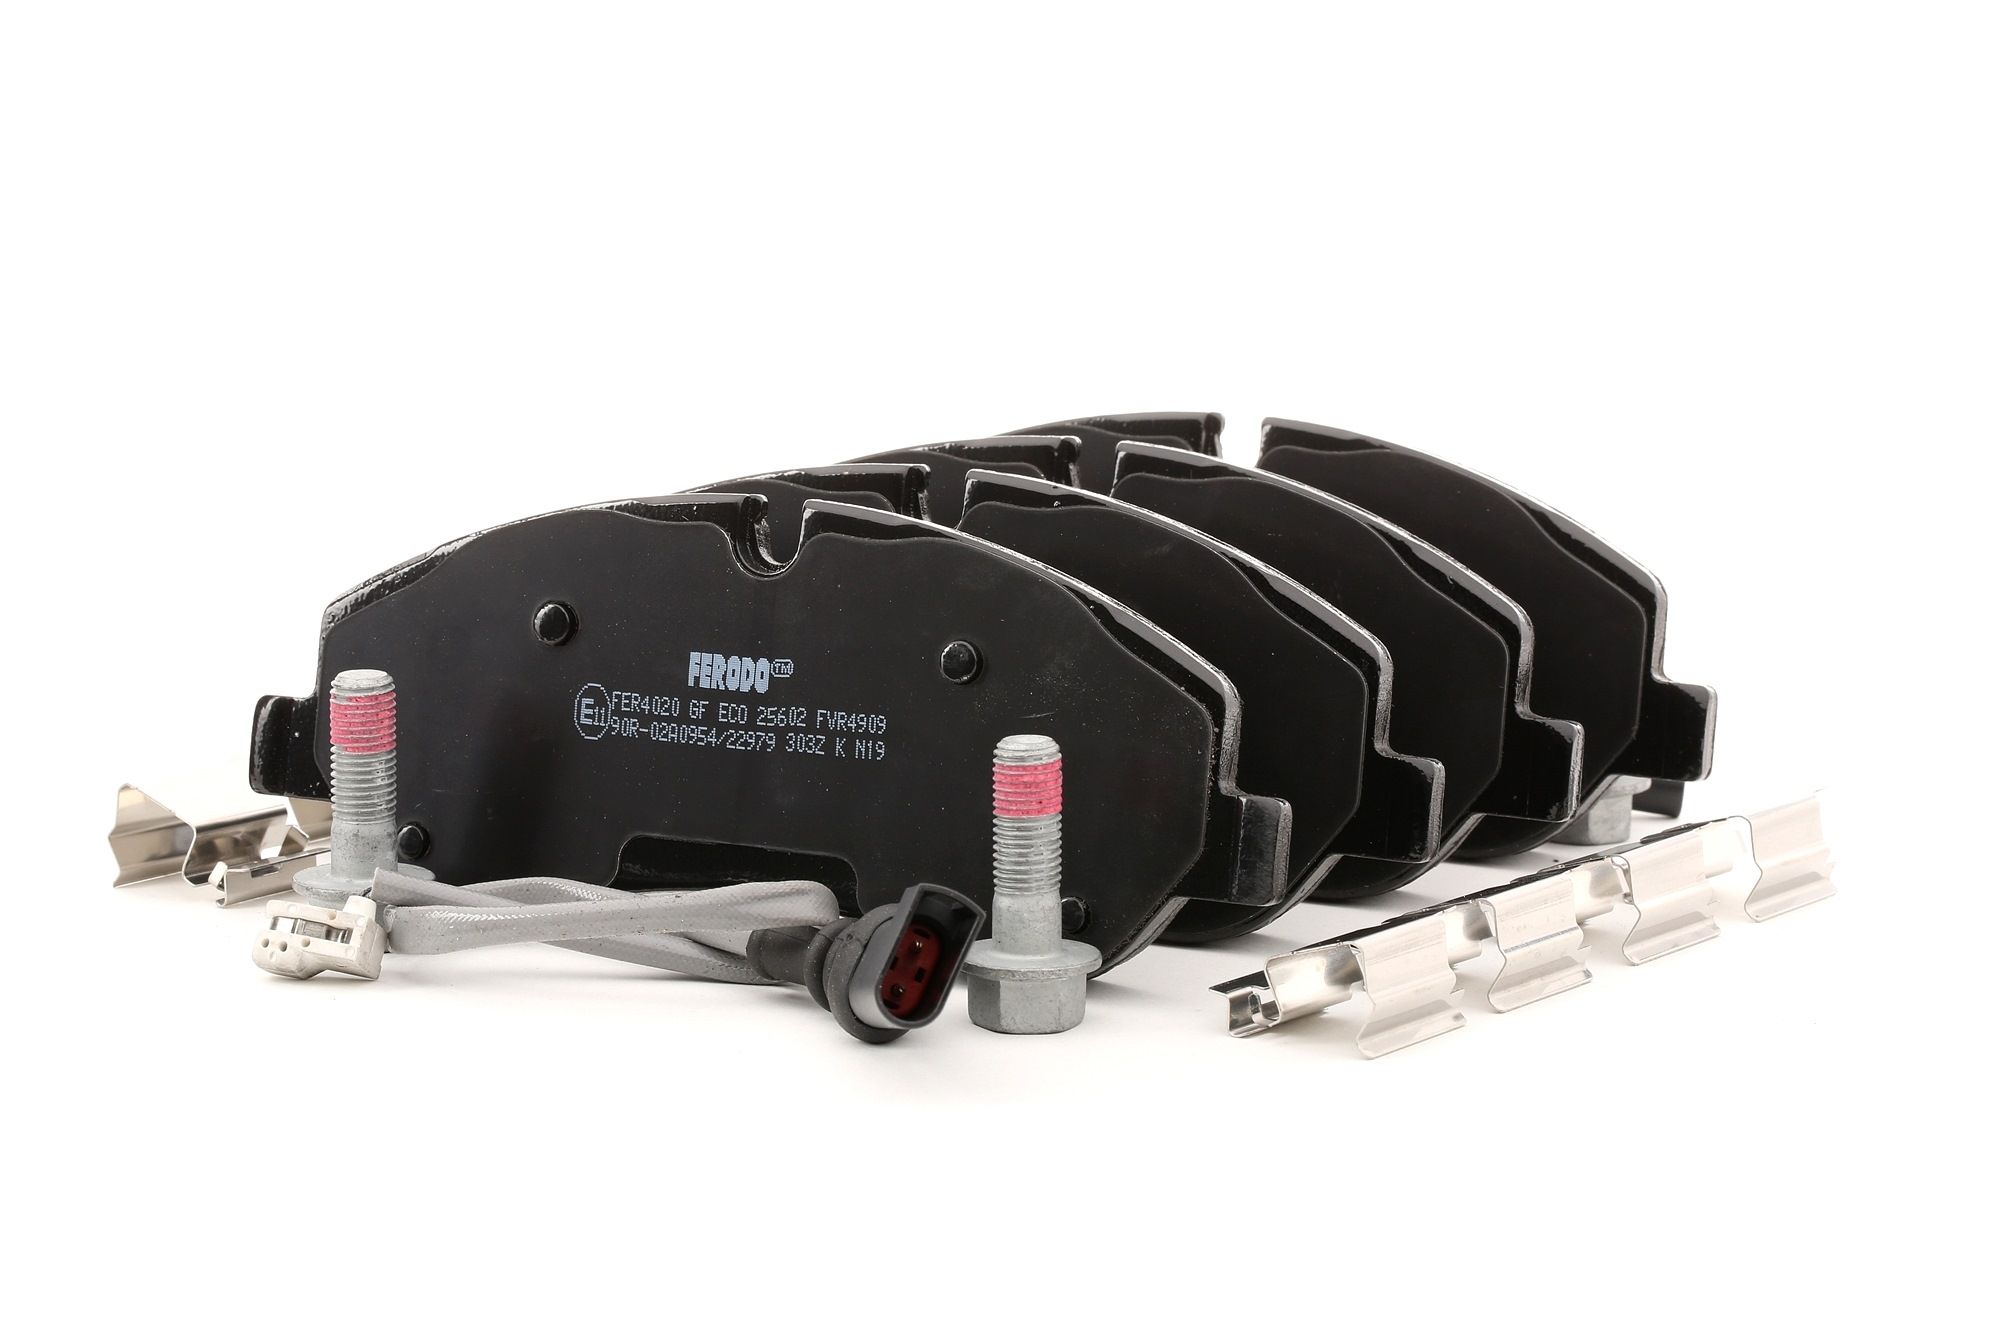 FERODO PREMIER ECO FRICTION FVR4909 Brake pad set incl. wear warning contact, with accessories